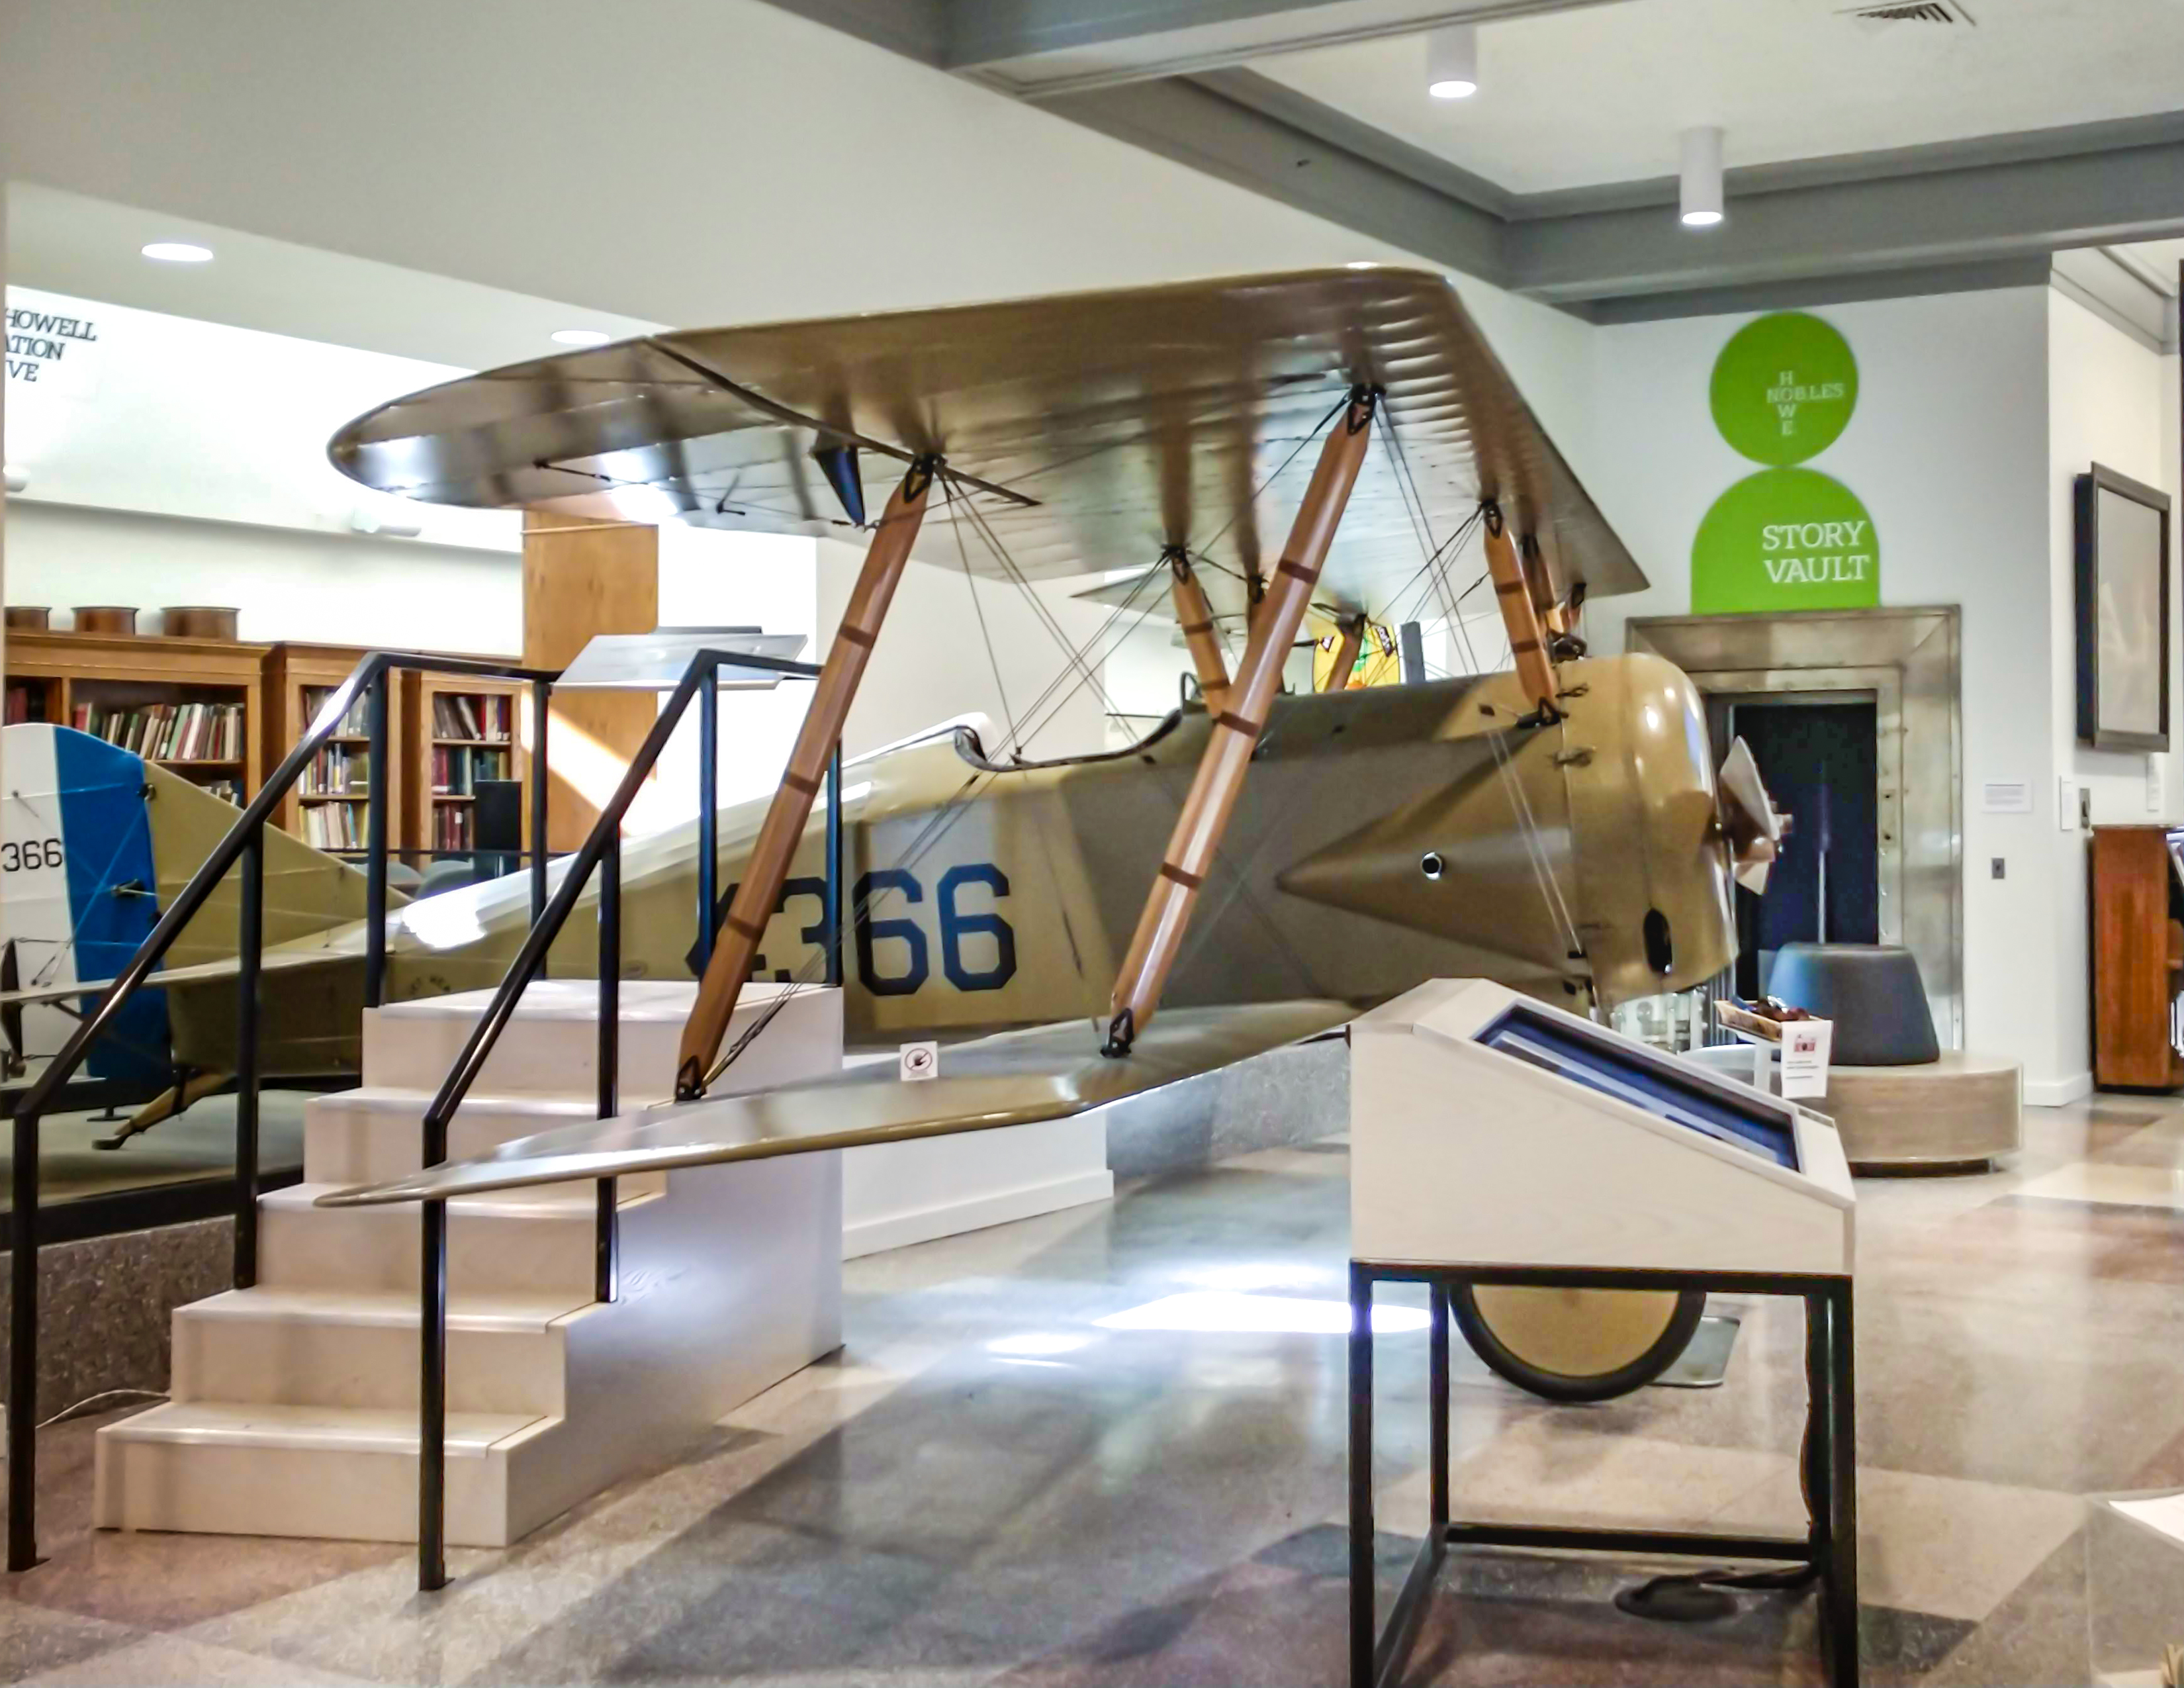 A rectangular photo of the Tommy Plane inside The History Center.